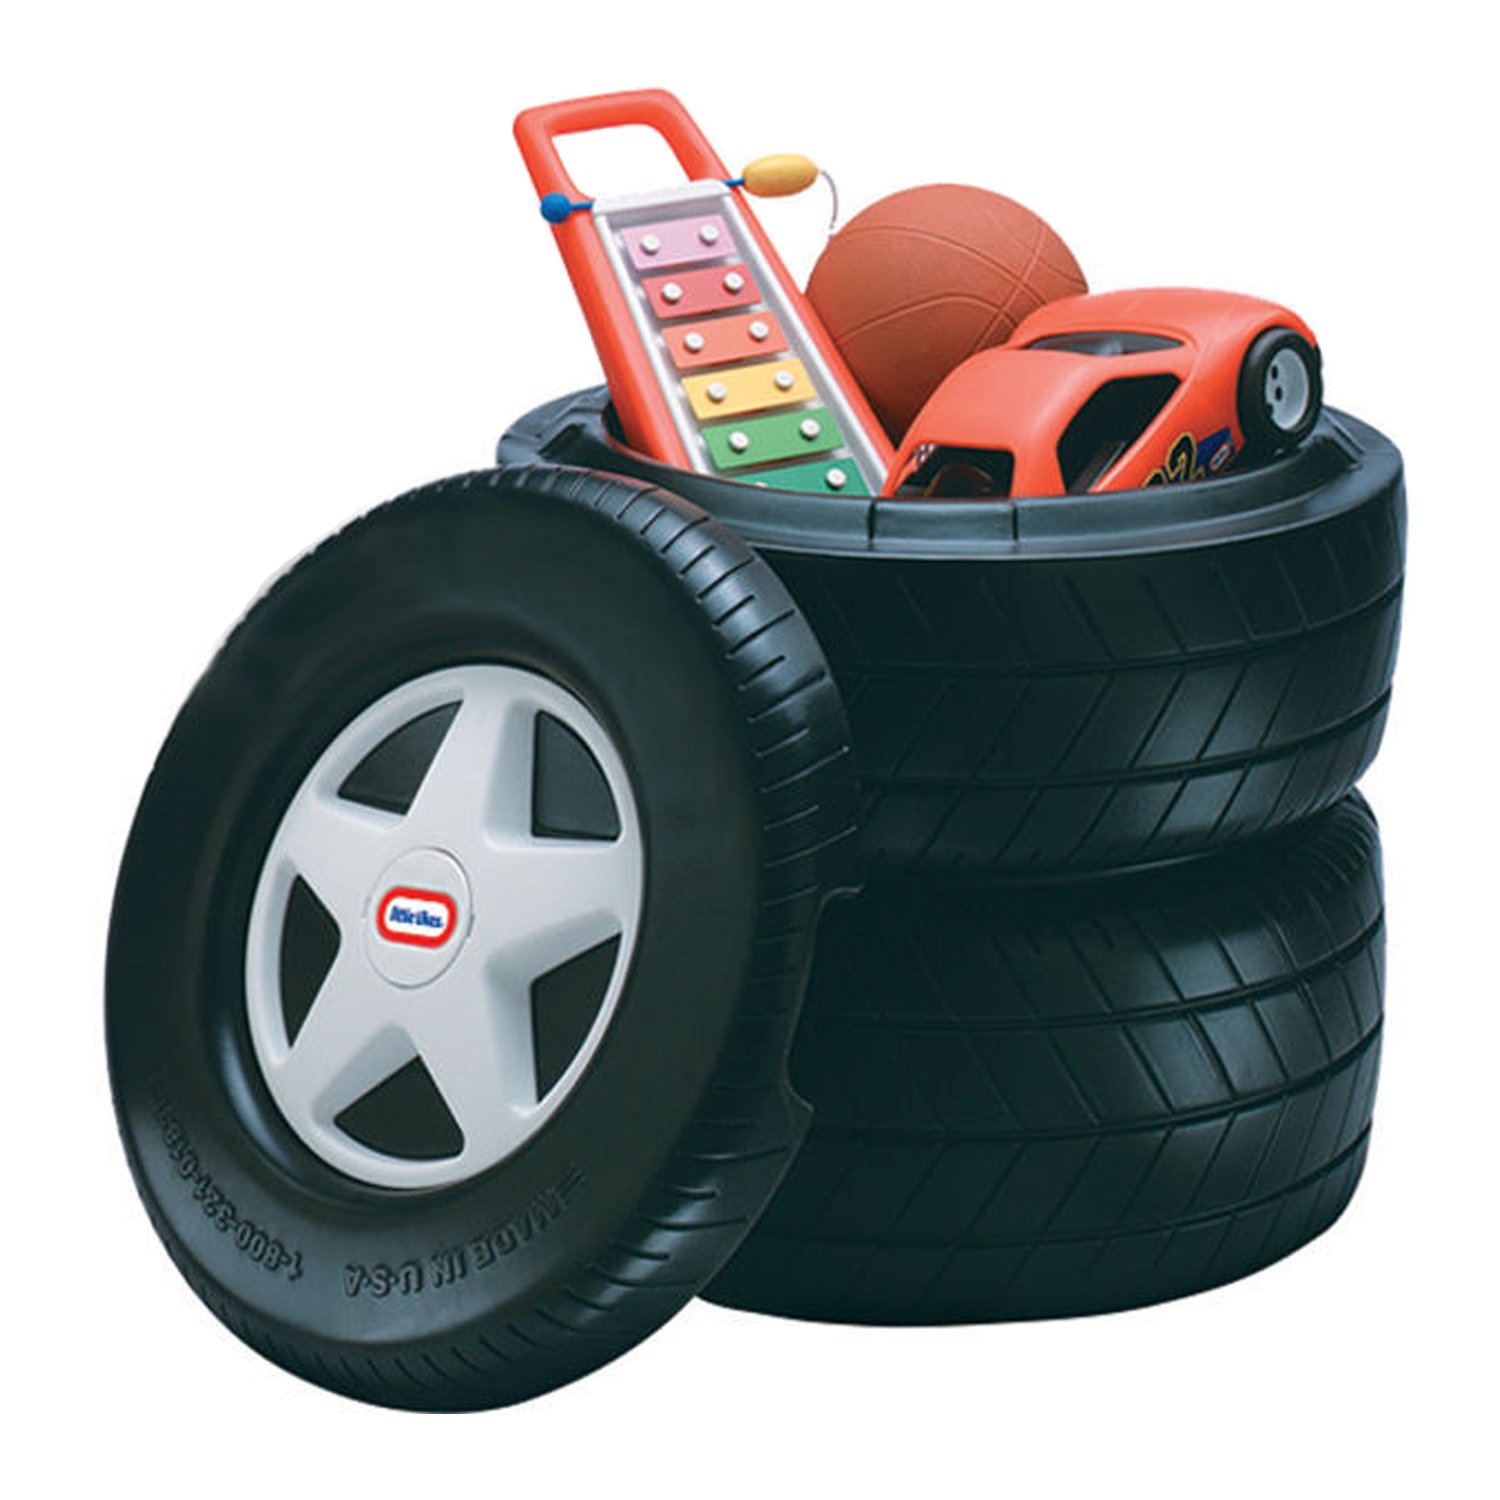 20" Little Tikes Kids Classic Racing Tire Toy Chest / Laundry Basket $37 + Free Shipping